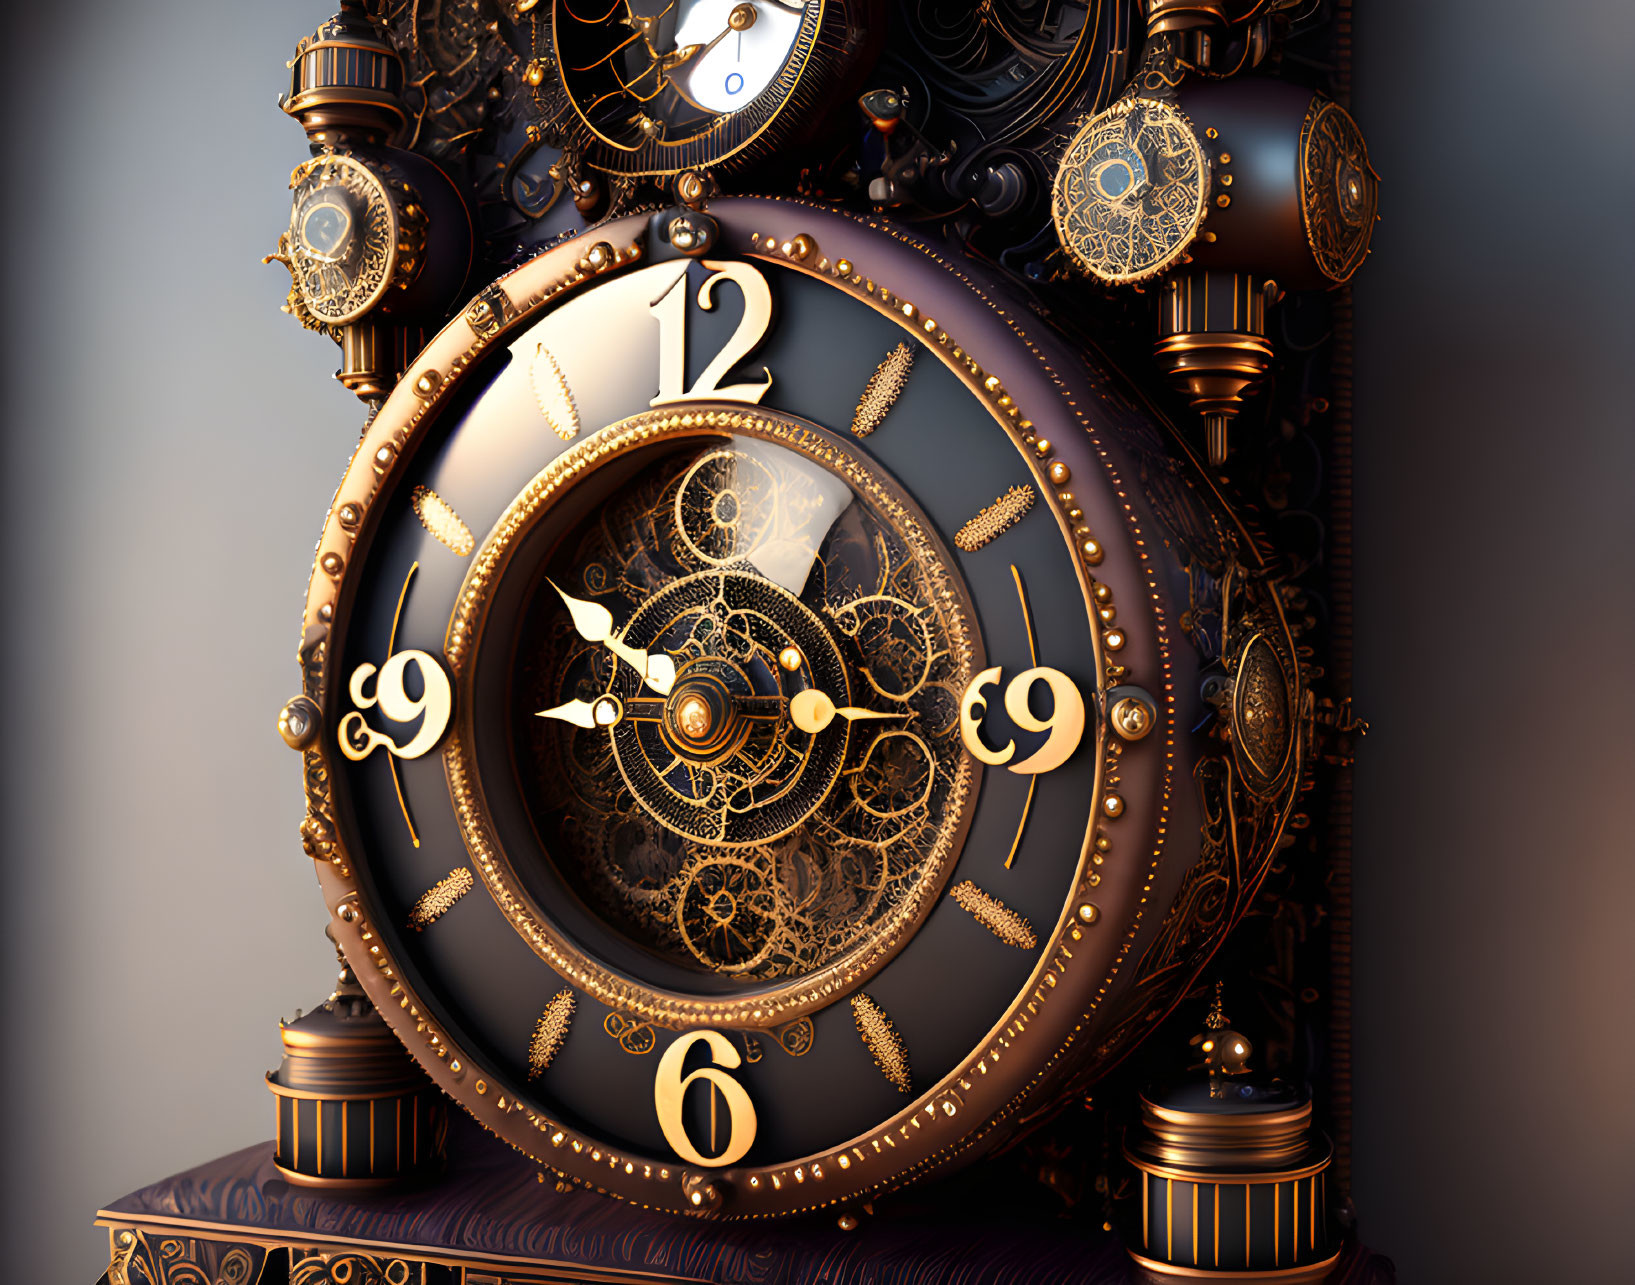 Steampunk-inspired ornate clock with golden and bronze color palette